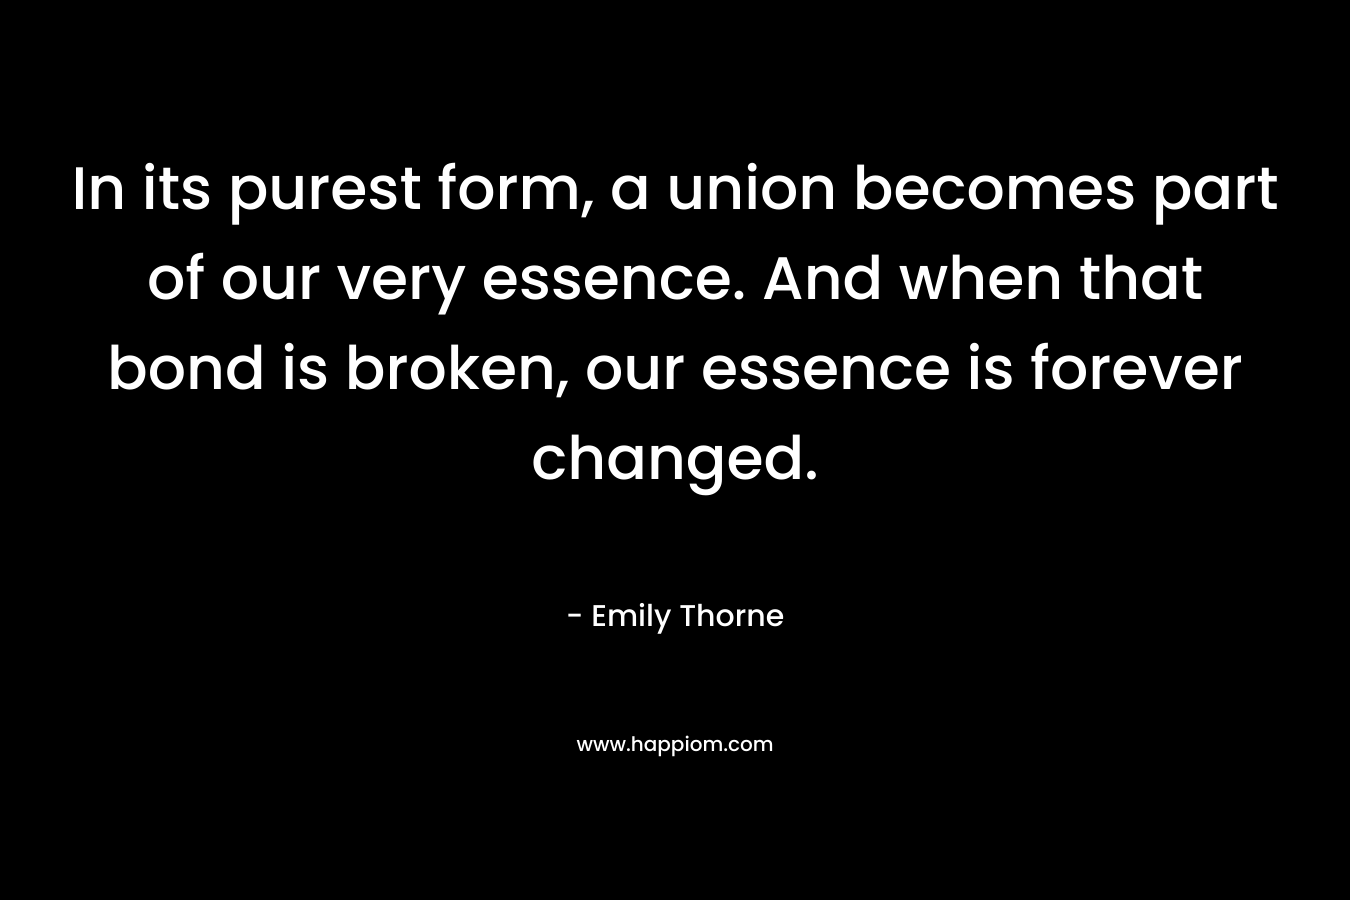 In its purest form, a union becomes part of our very essence. And when that bond is broken, our essence is forever changed.